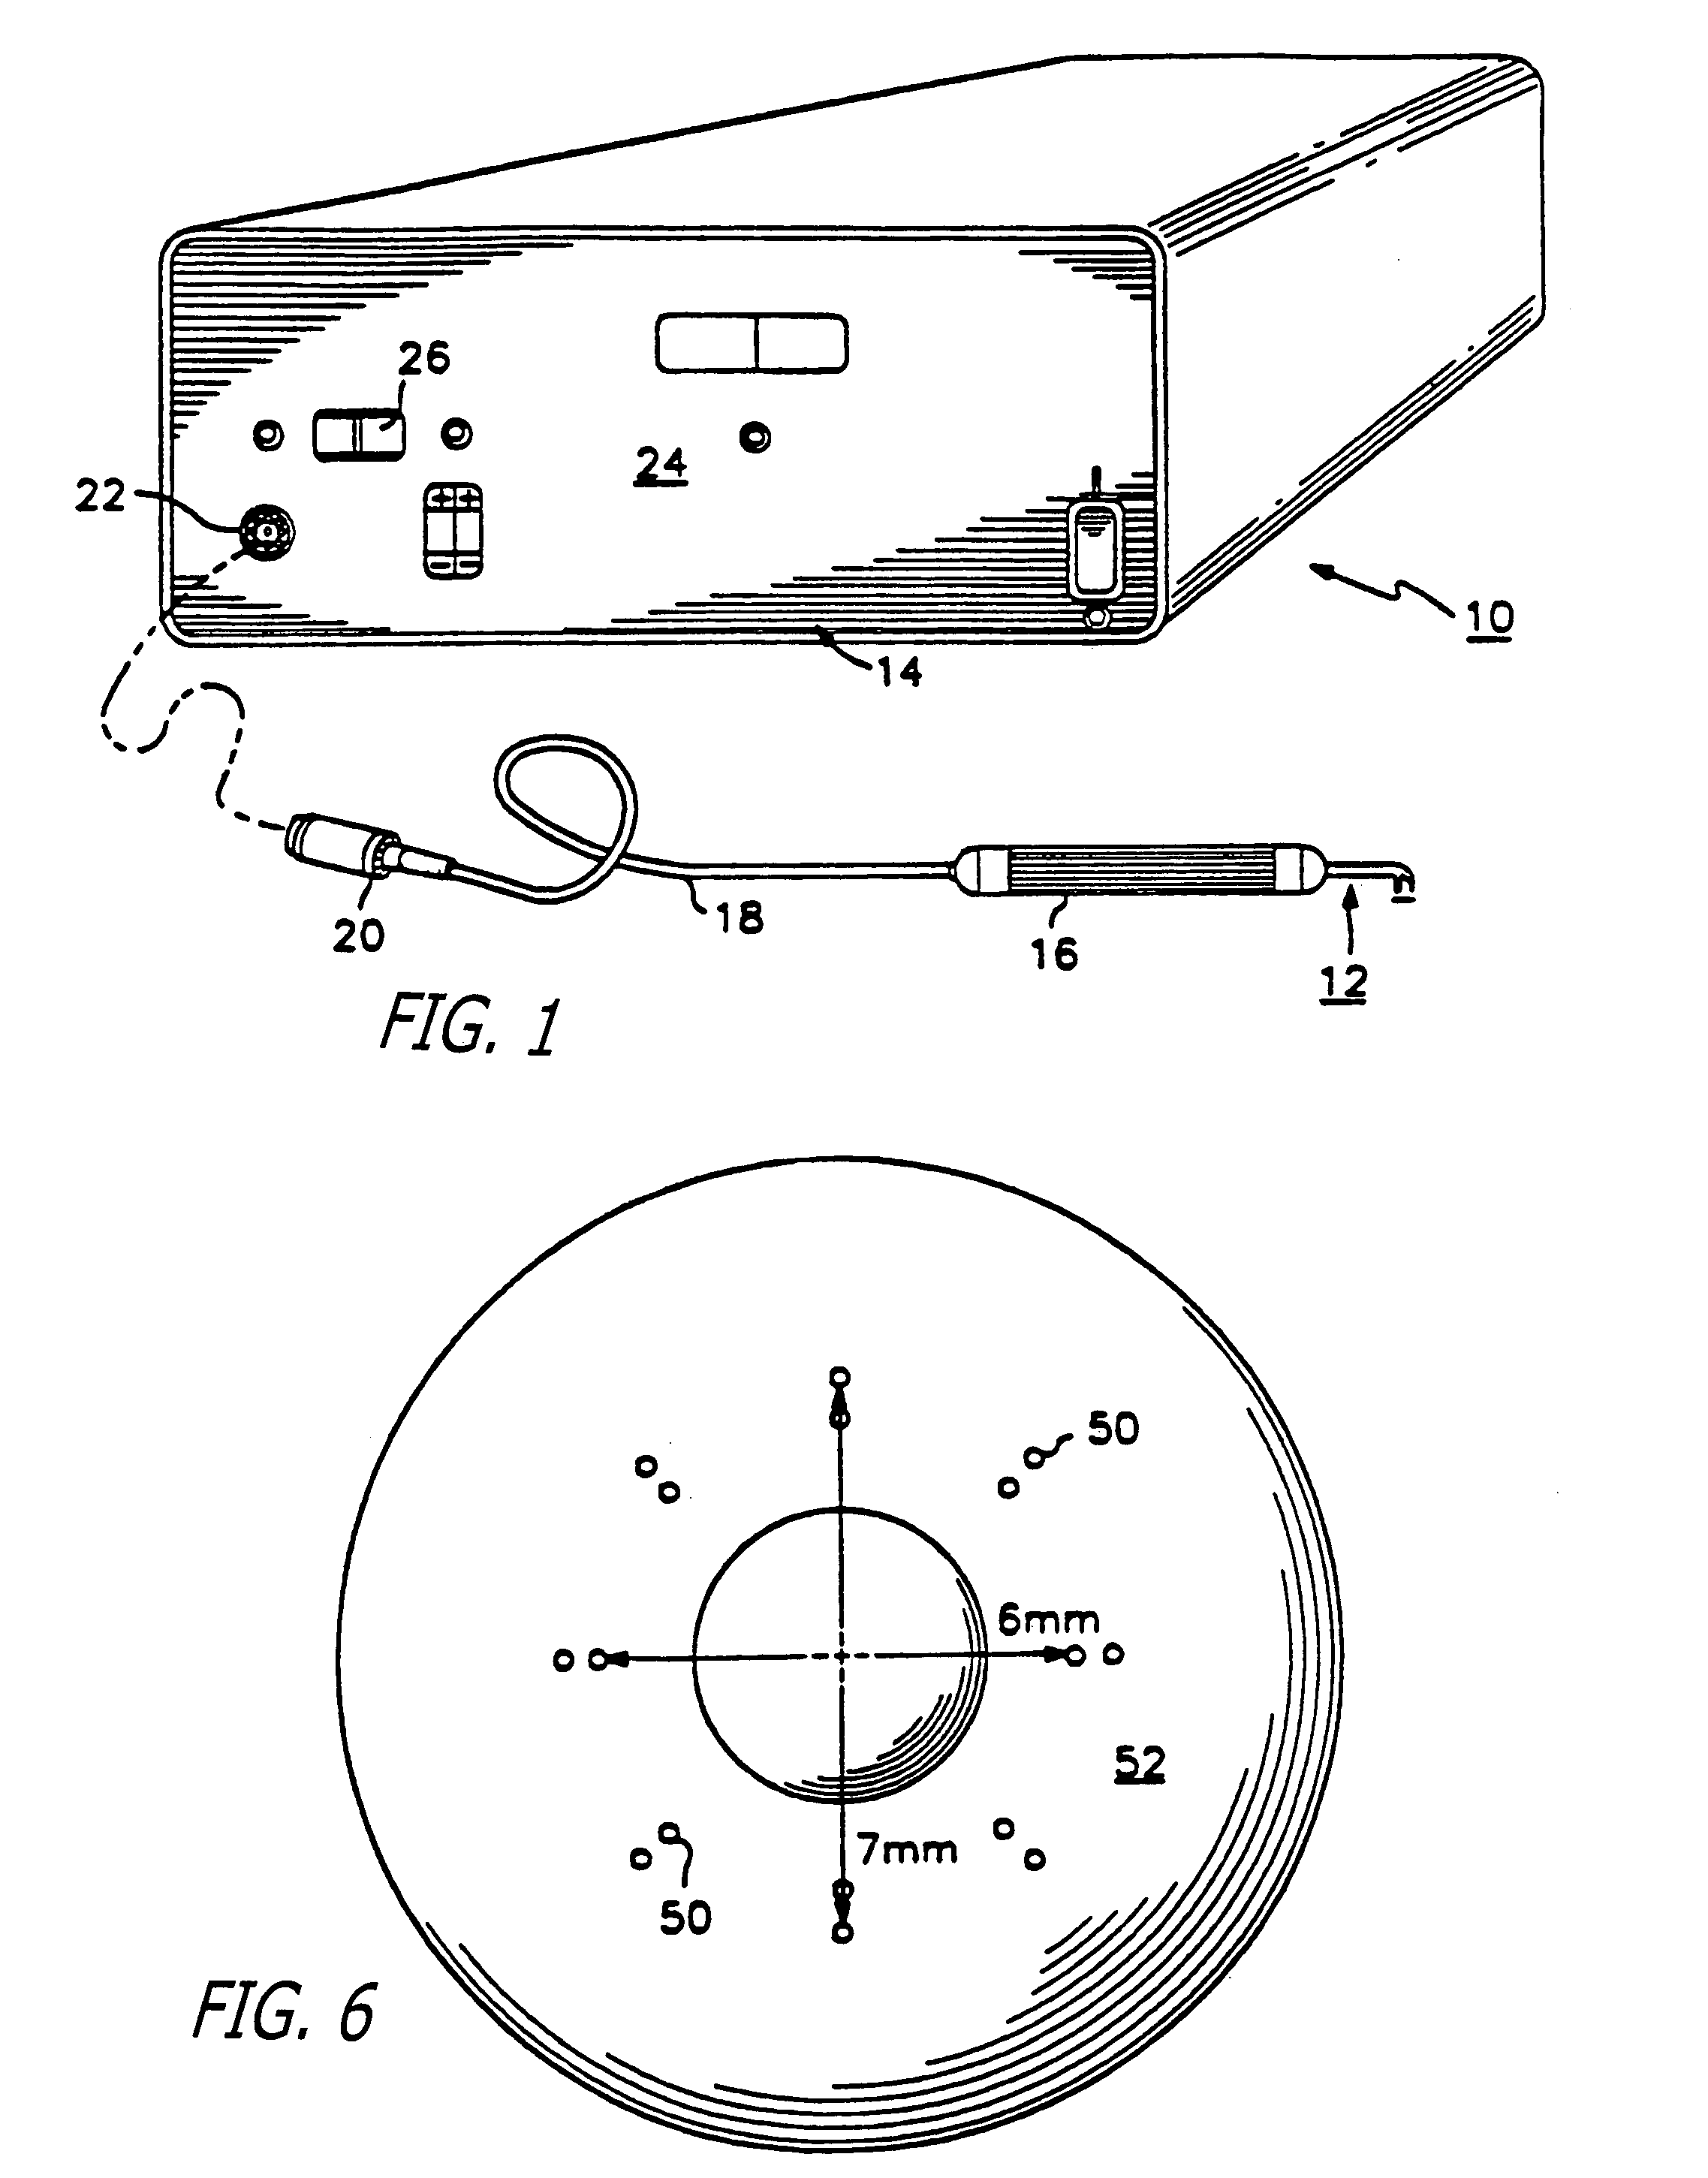 Thermokeratoplasty system with a power supply that can determine a wet or dry cornea